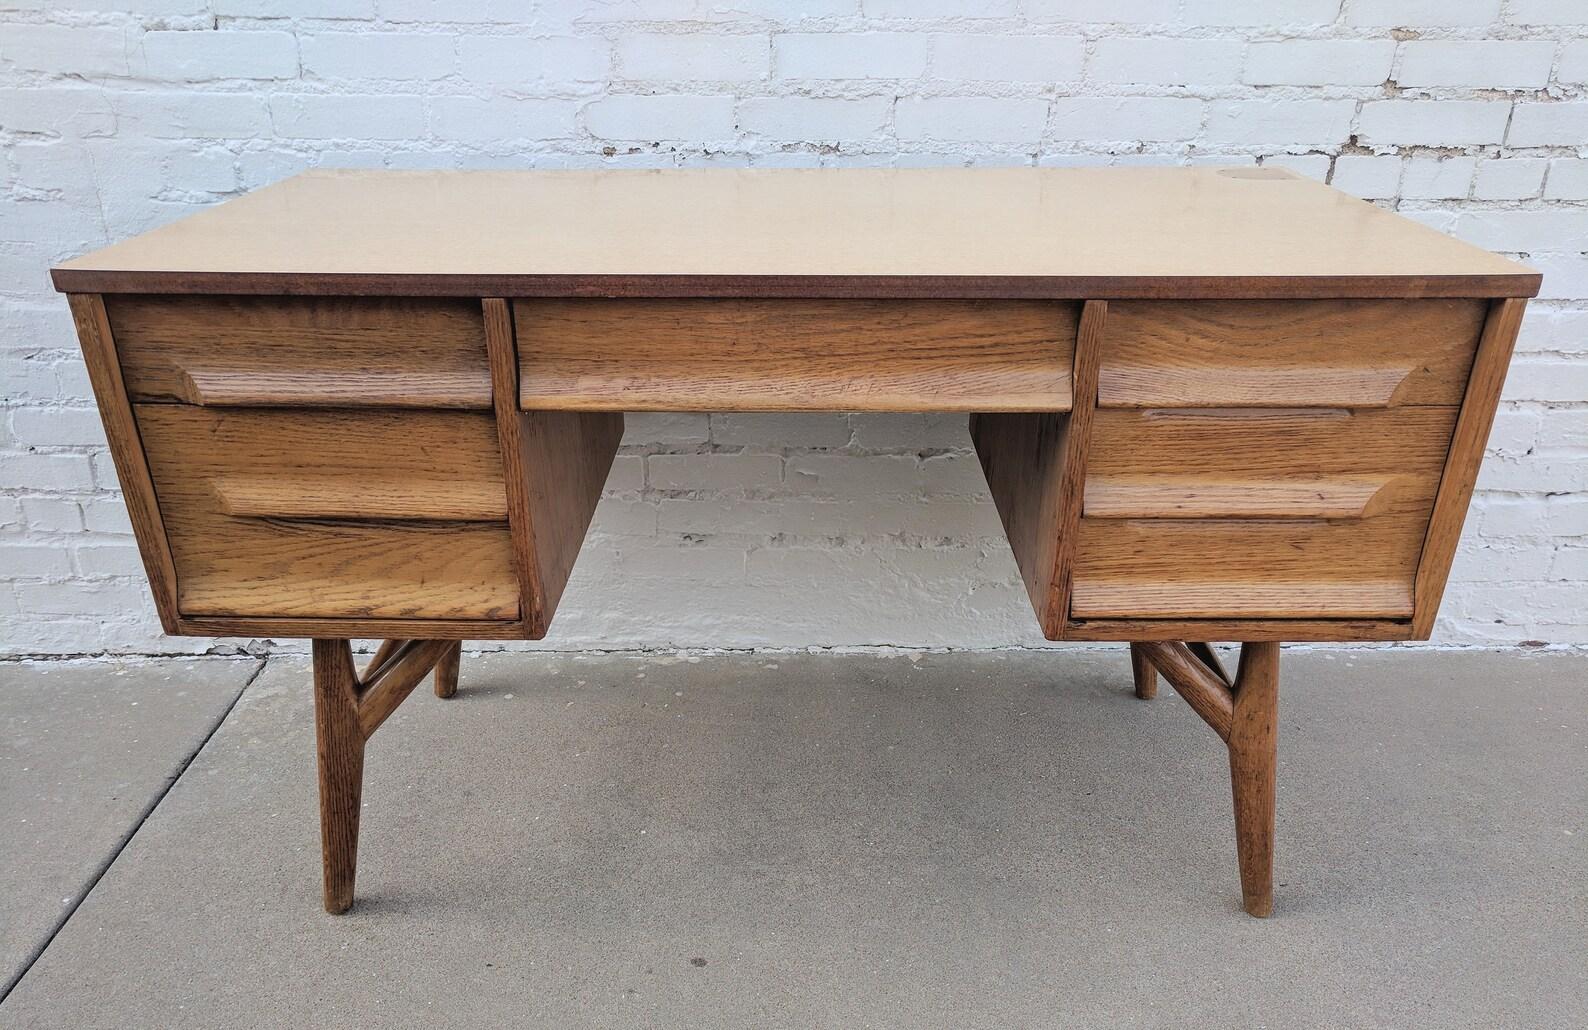 Mid Century Modern Solid Oak Desk with Laminate Top

Good vintage condition with one leg having a portion split away from the bracing screw which leads to some give in the leg.

Additional information:
Materials: Oak
Vintage from the